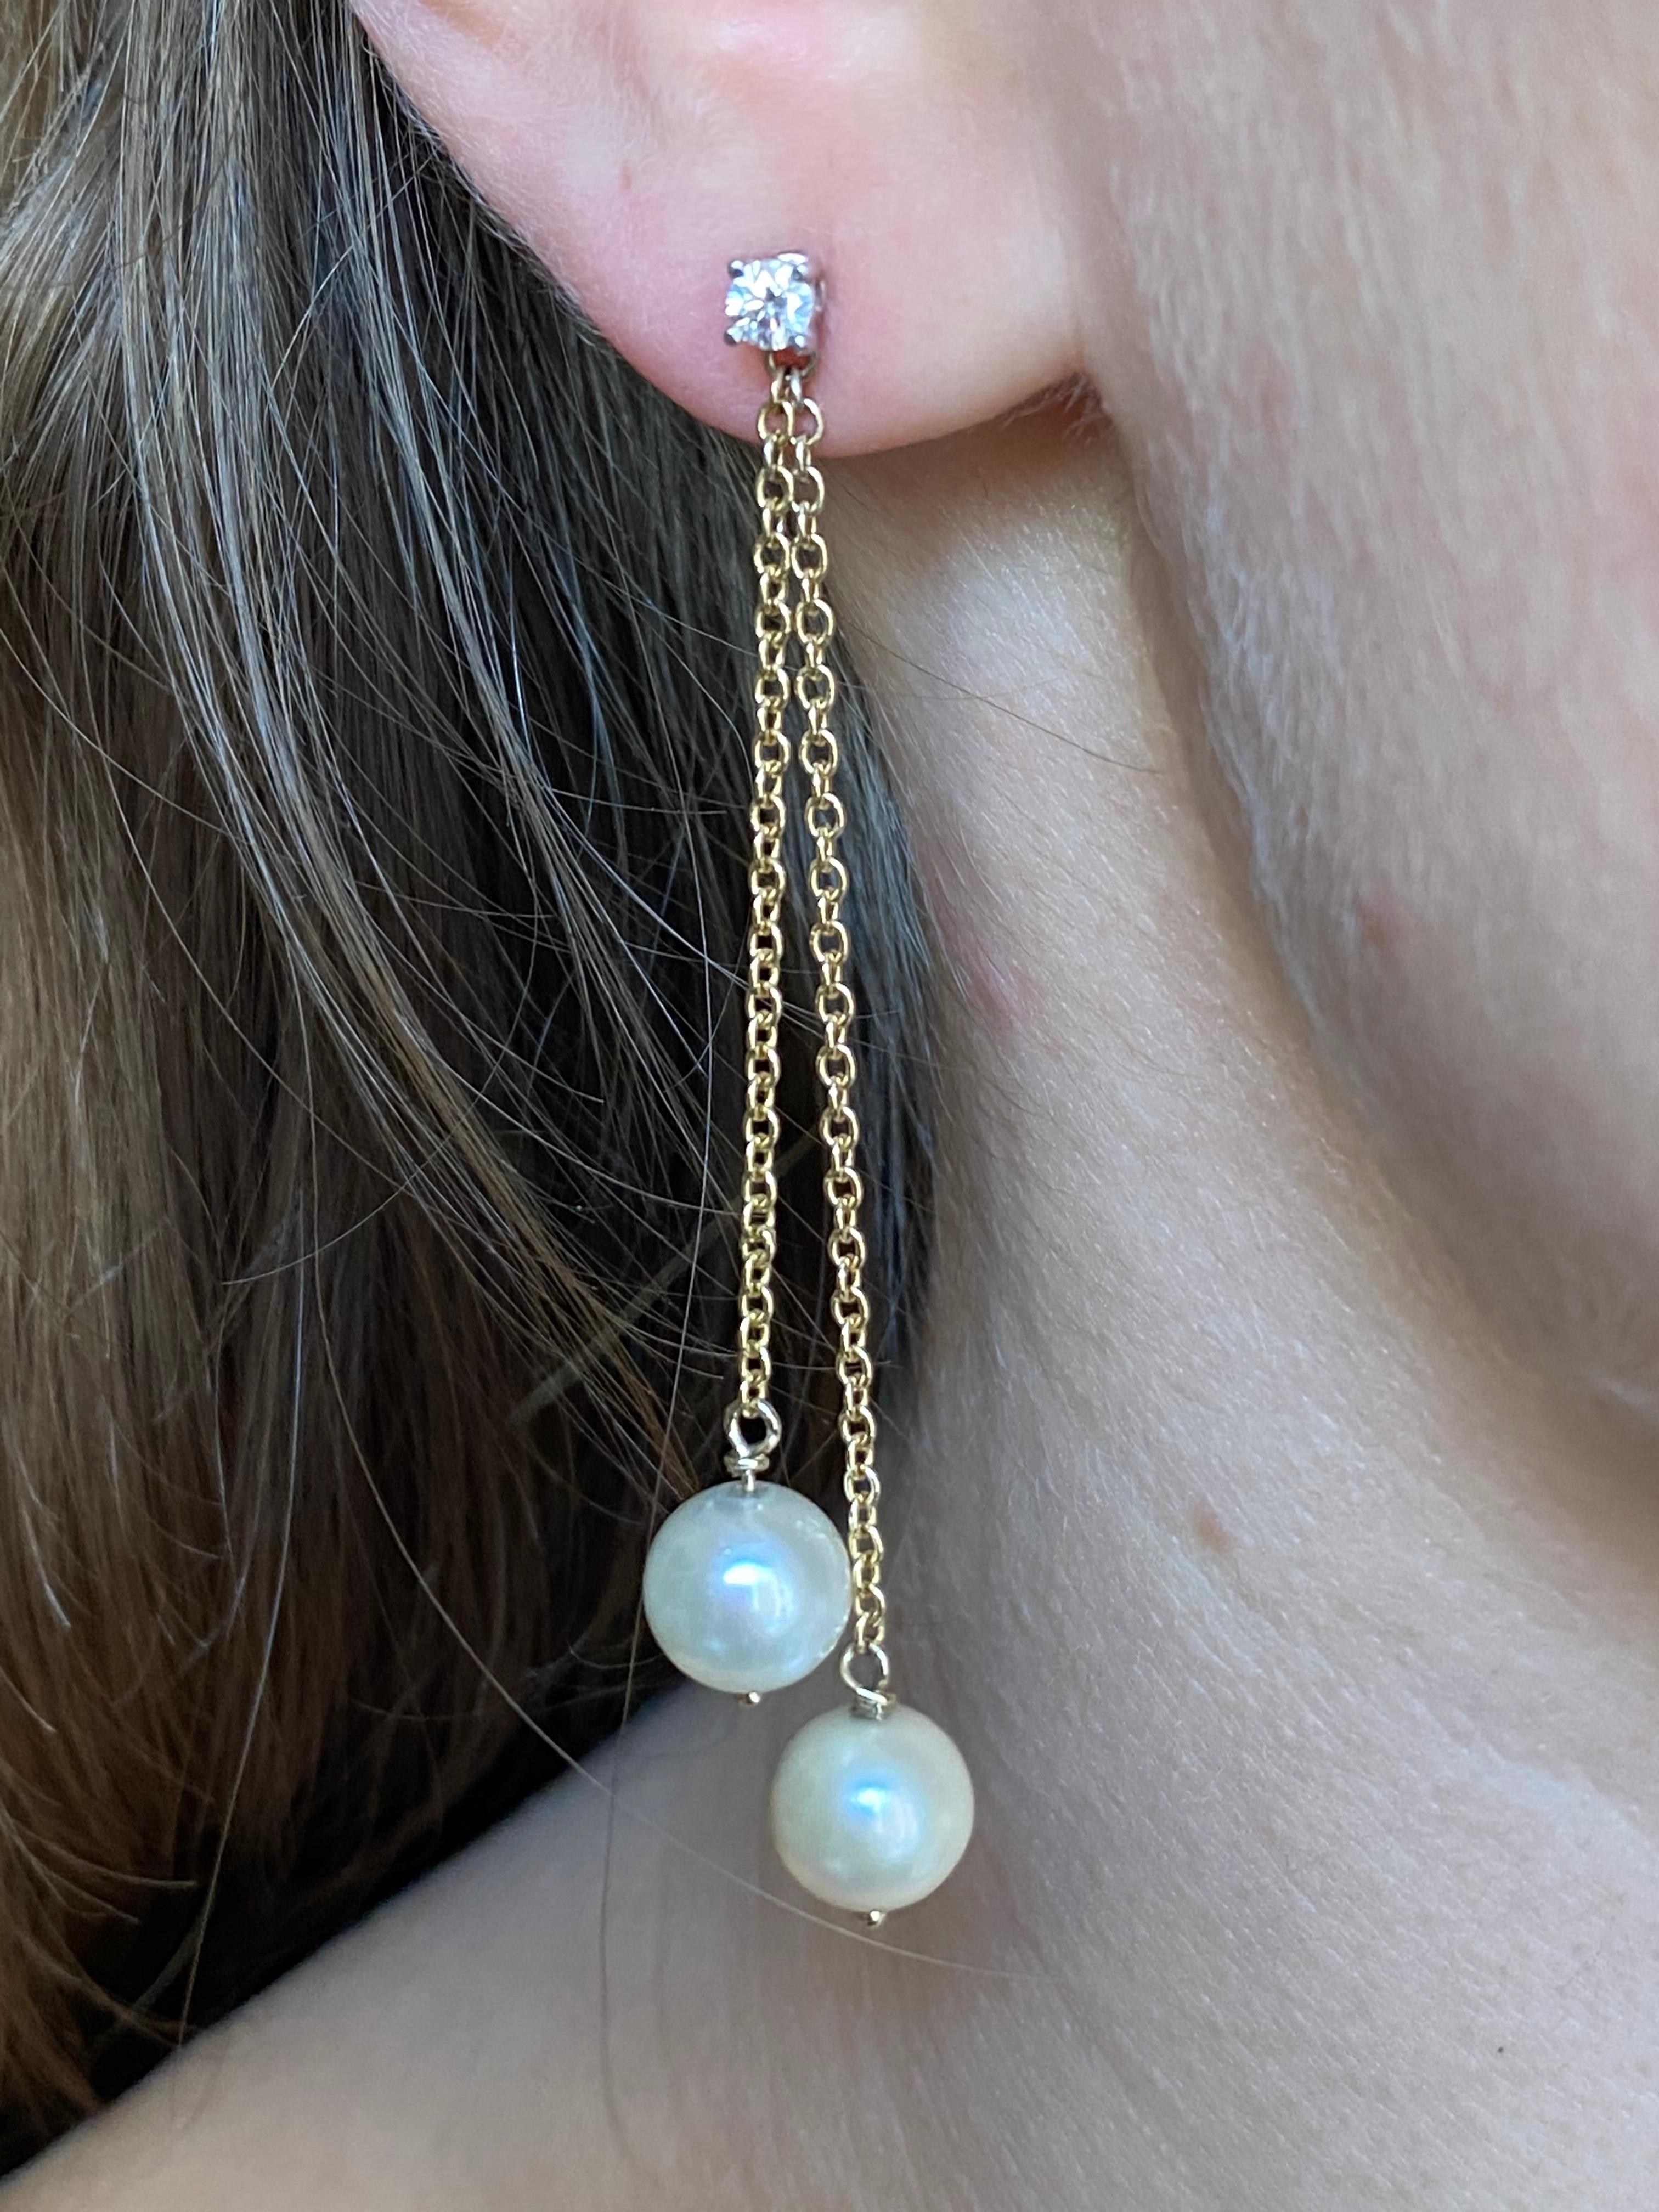 These amazing earrings are made with a 18 karats yellow gold little chain and 0,16 karats white diamonds, they're also embellished with two round white sea pearls.  
Pearls are believed to offer protection, as well as attract good luck and wealth.
A